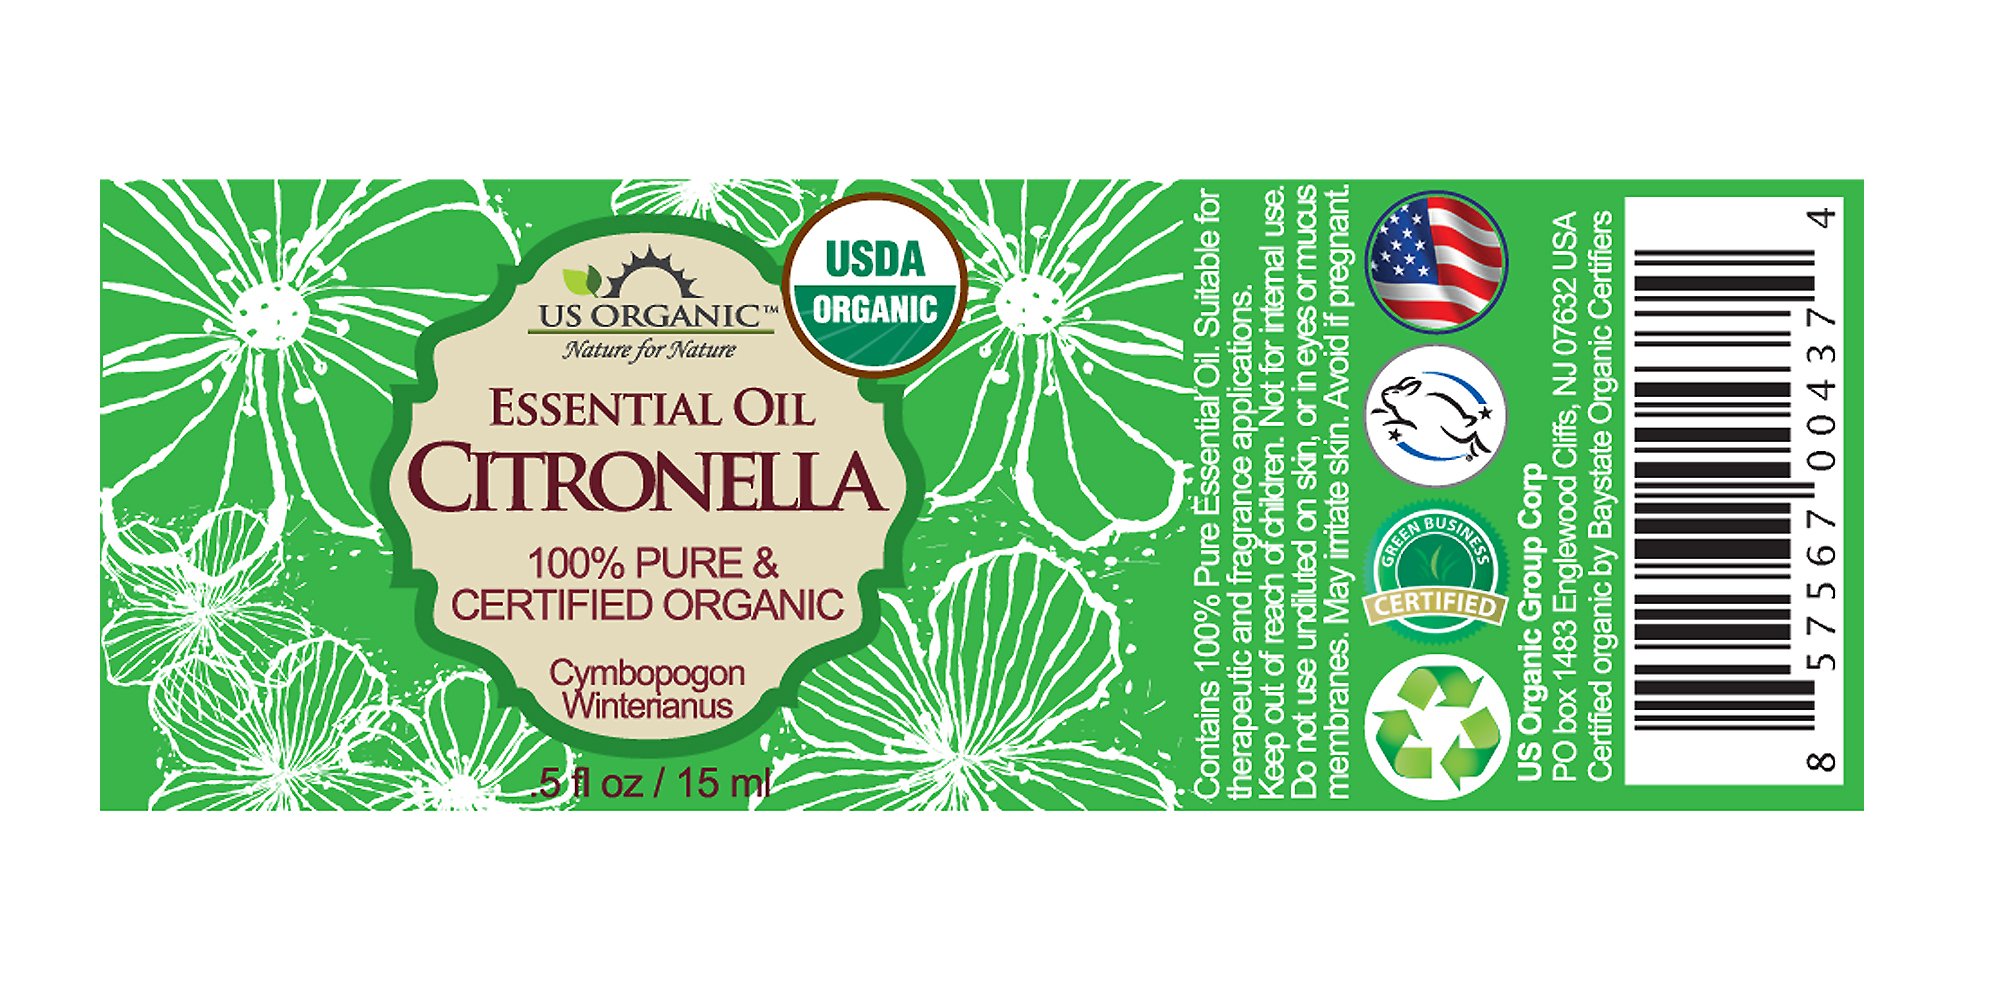 US Organic Citronella Essential Oil, USDA Certified, 100% Pure, 15 ml, Improved caps and droppers – Used for Skin Care, Many DIY Projects Like Candle Making and Much More